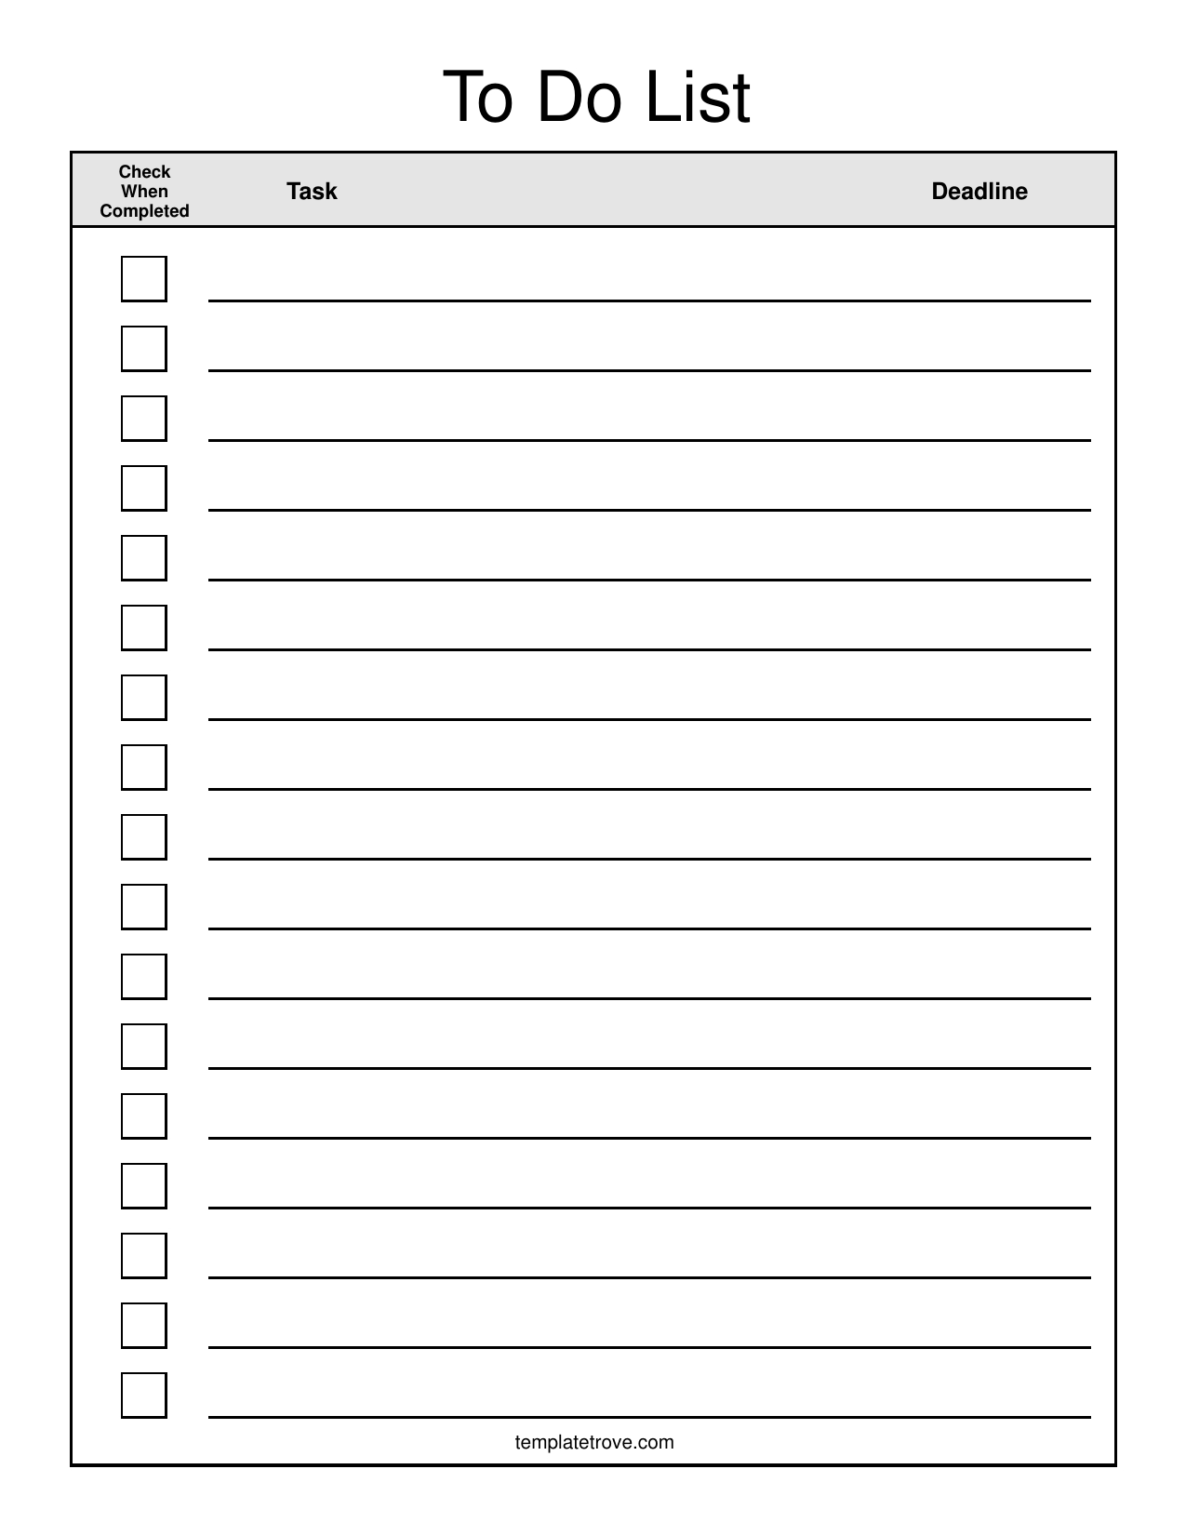 download-to-do-checklist-template-excel-pdf-rtf-word-for-blank